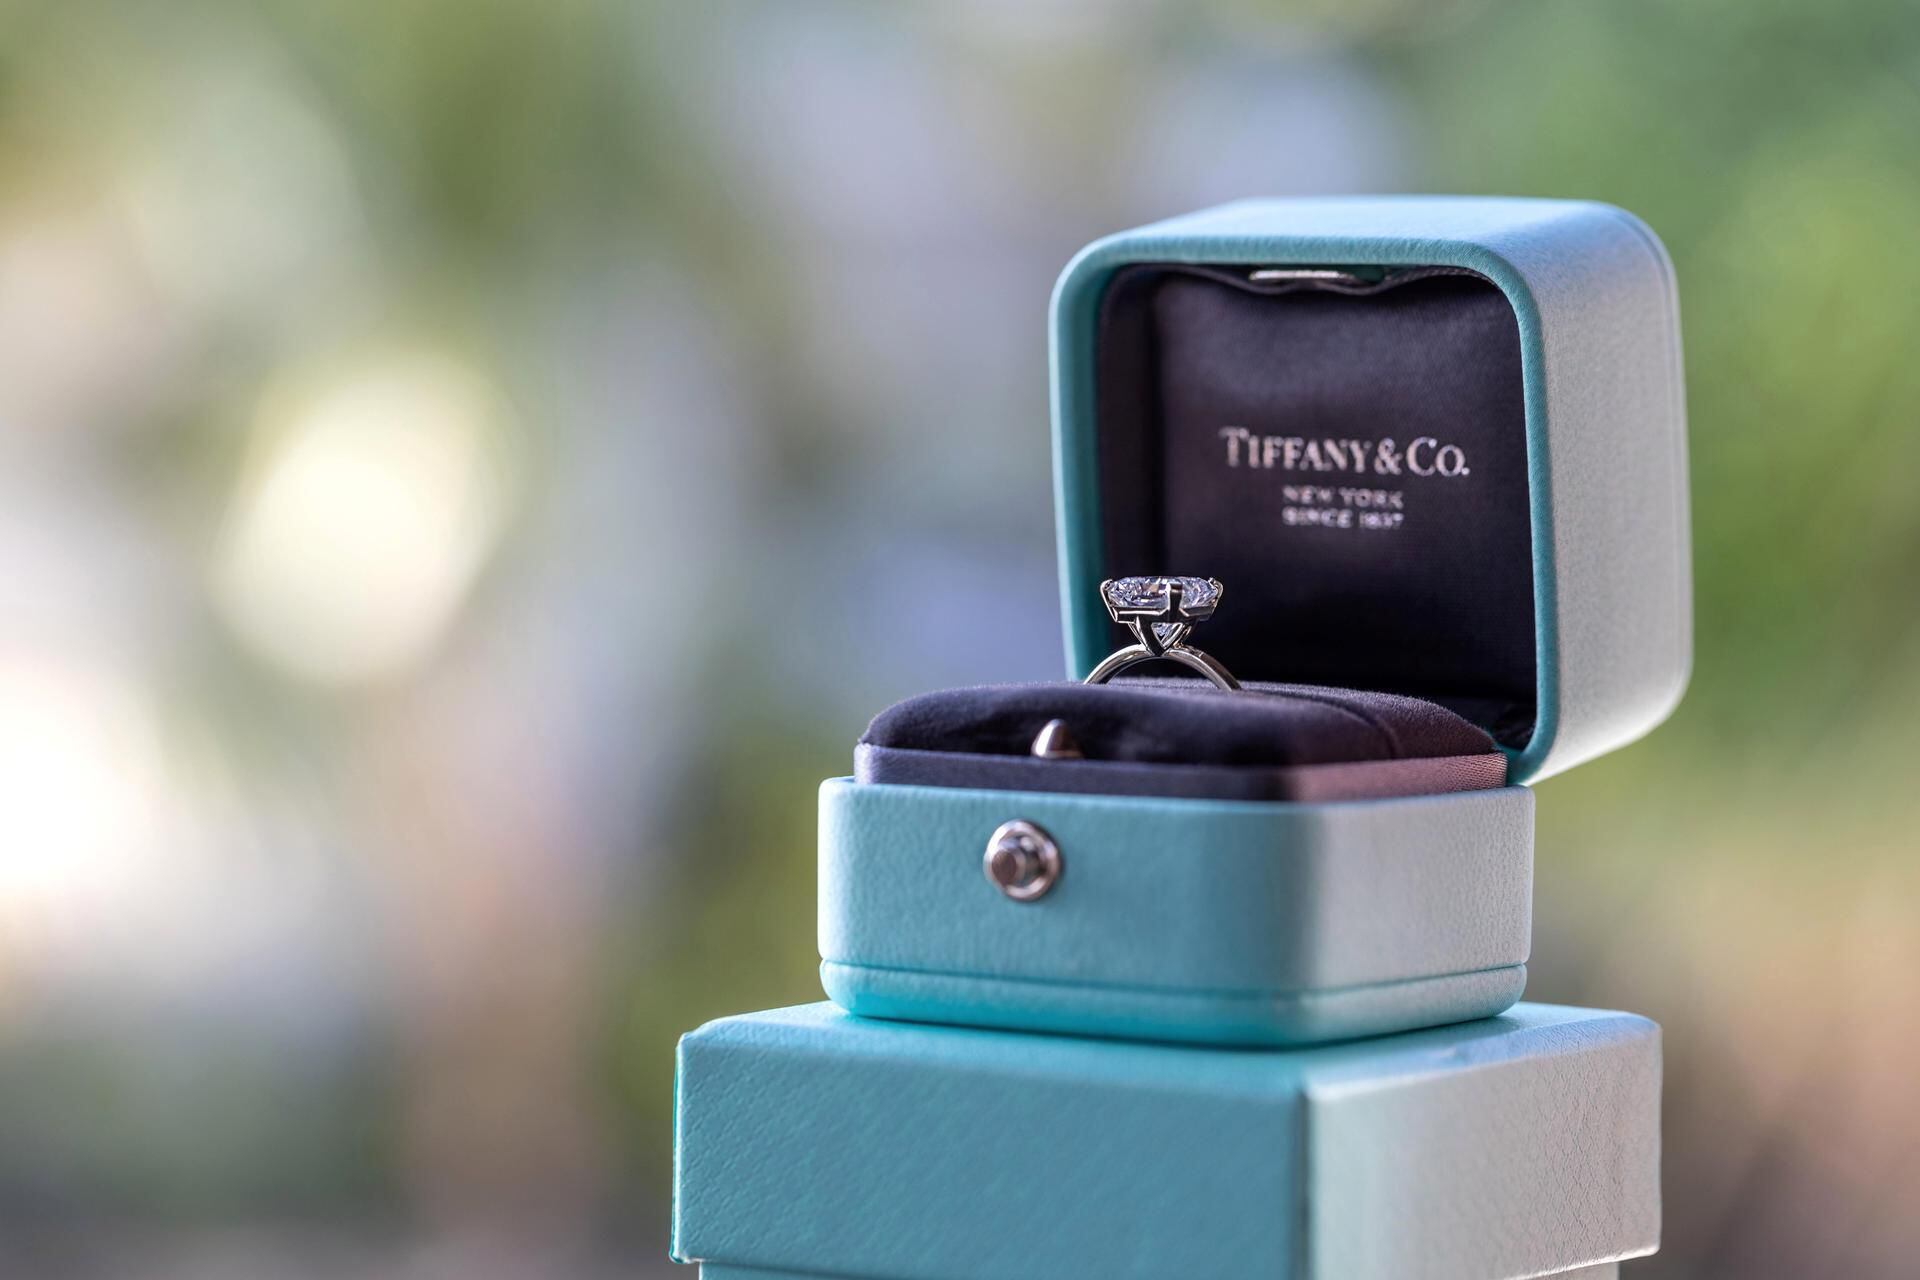 LVMH Delays $16bn Acquisition of Tiffany & Co.